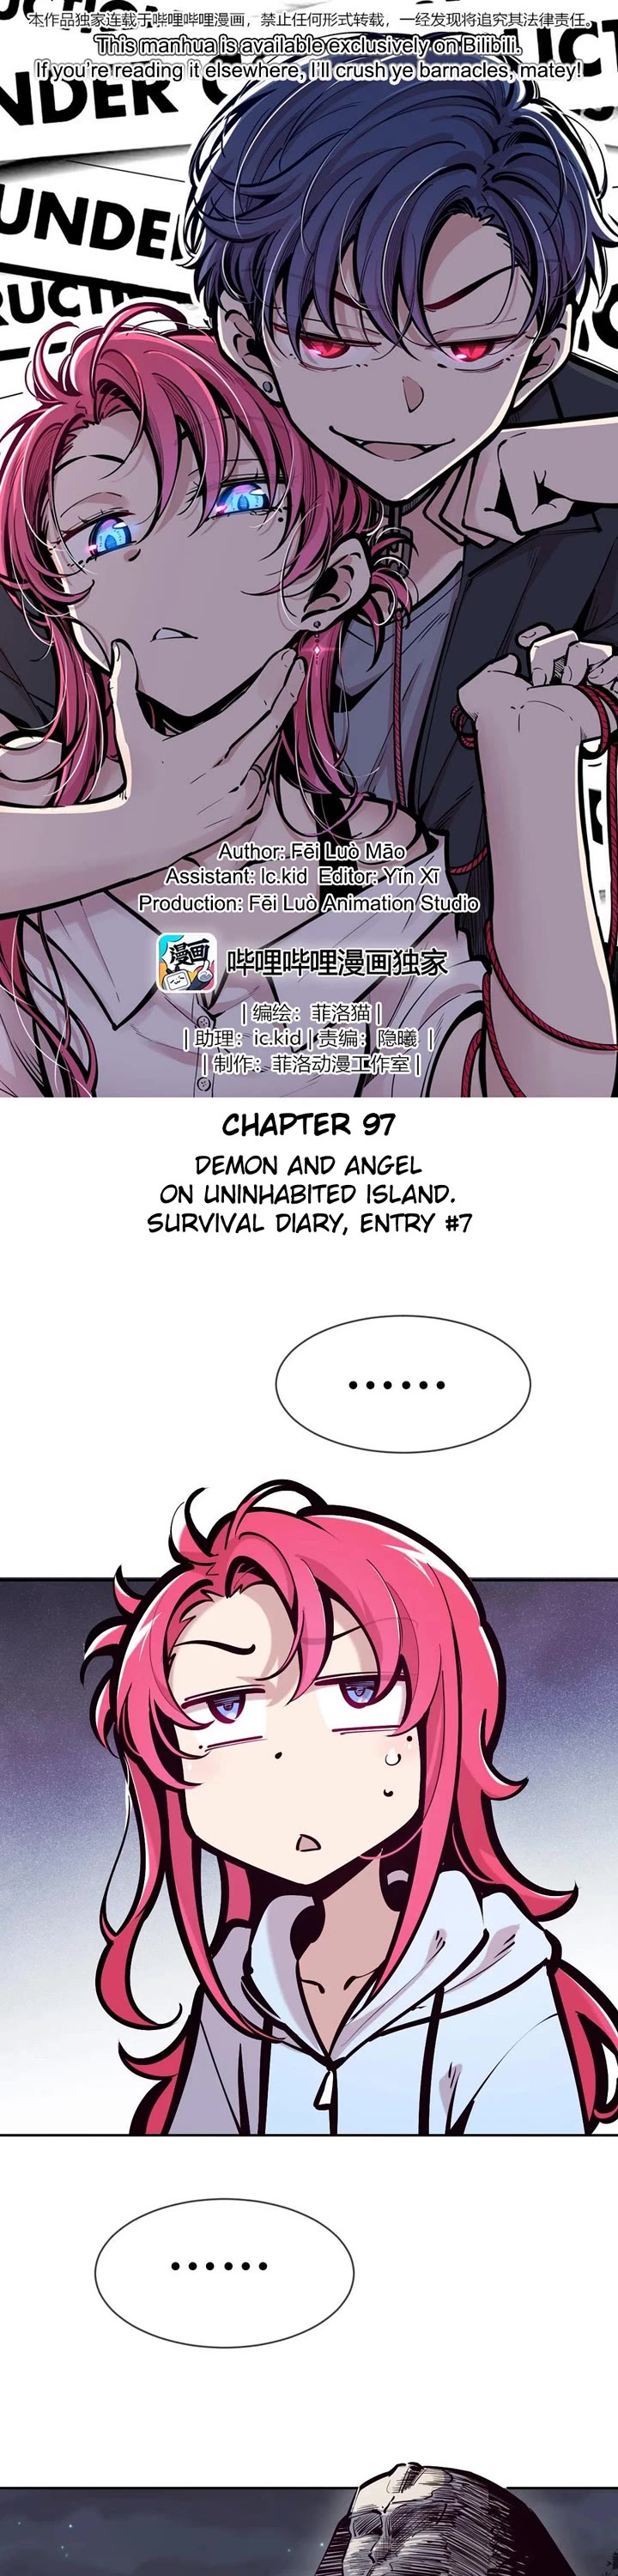 Demon X Angel, Can't Get Along! Chapter 97: Demon And Angel On Uninhabited Island. Survival Diary, Entry #7 - Picture 1